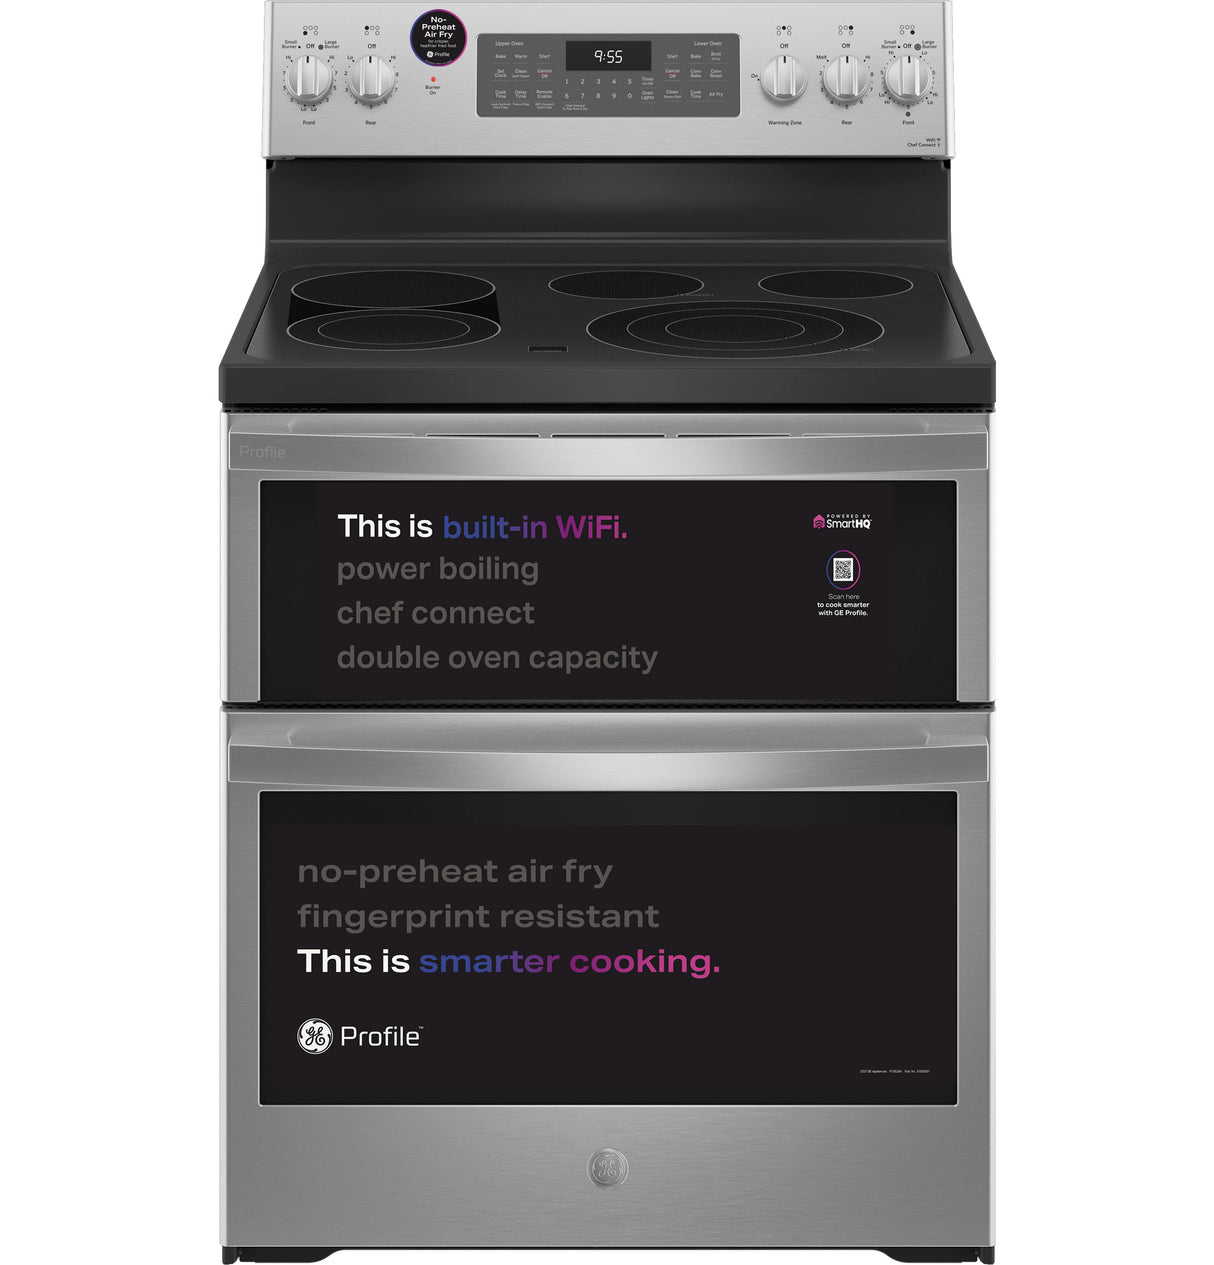 GE Profile(TM) 30" Smart Free-Standing Electric Double Oven Convection Range with No Preheat Air Fry - (PB965YPFS)